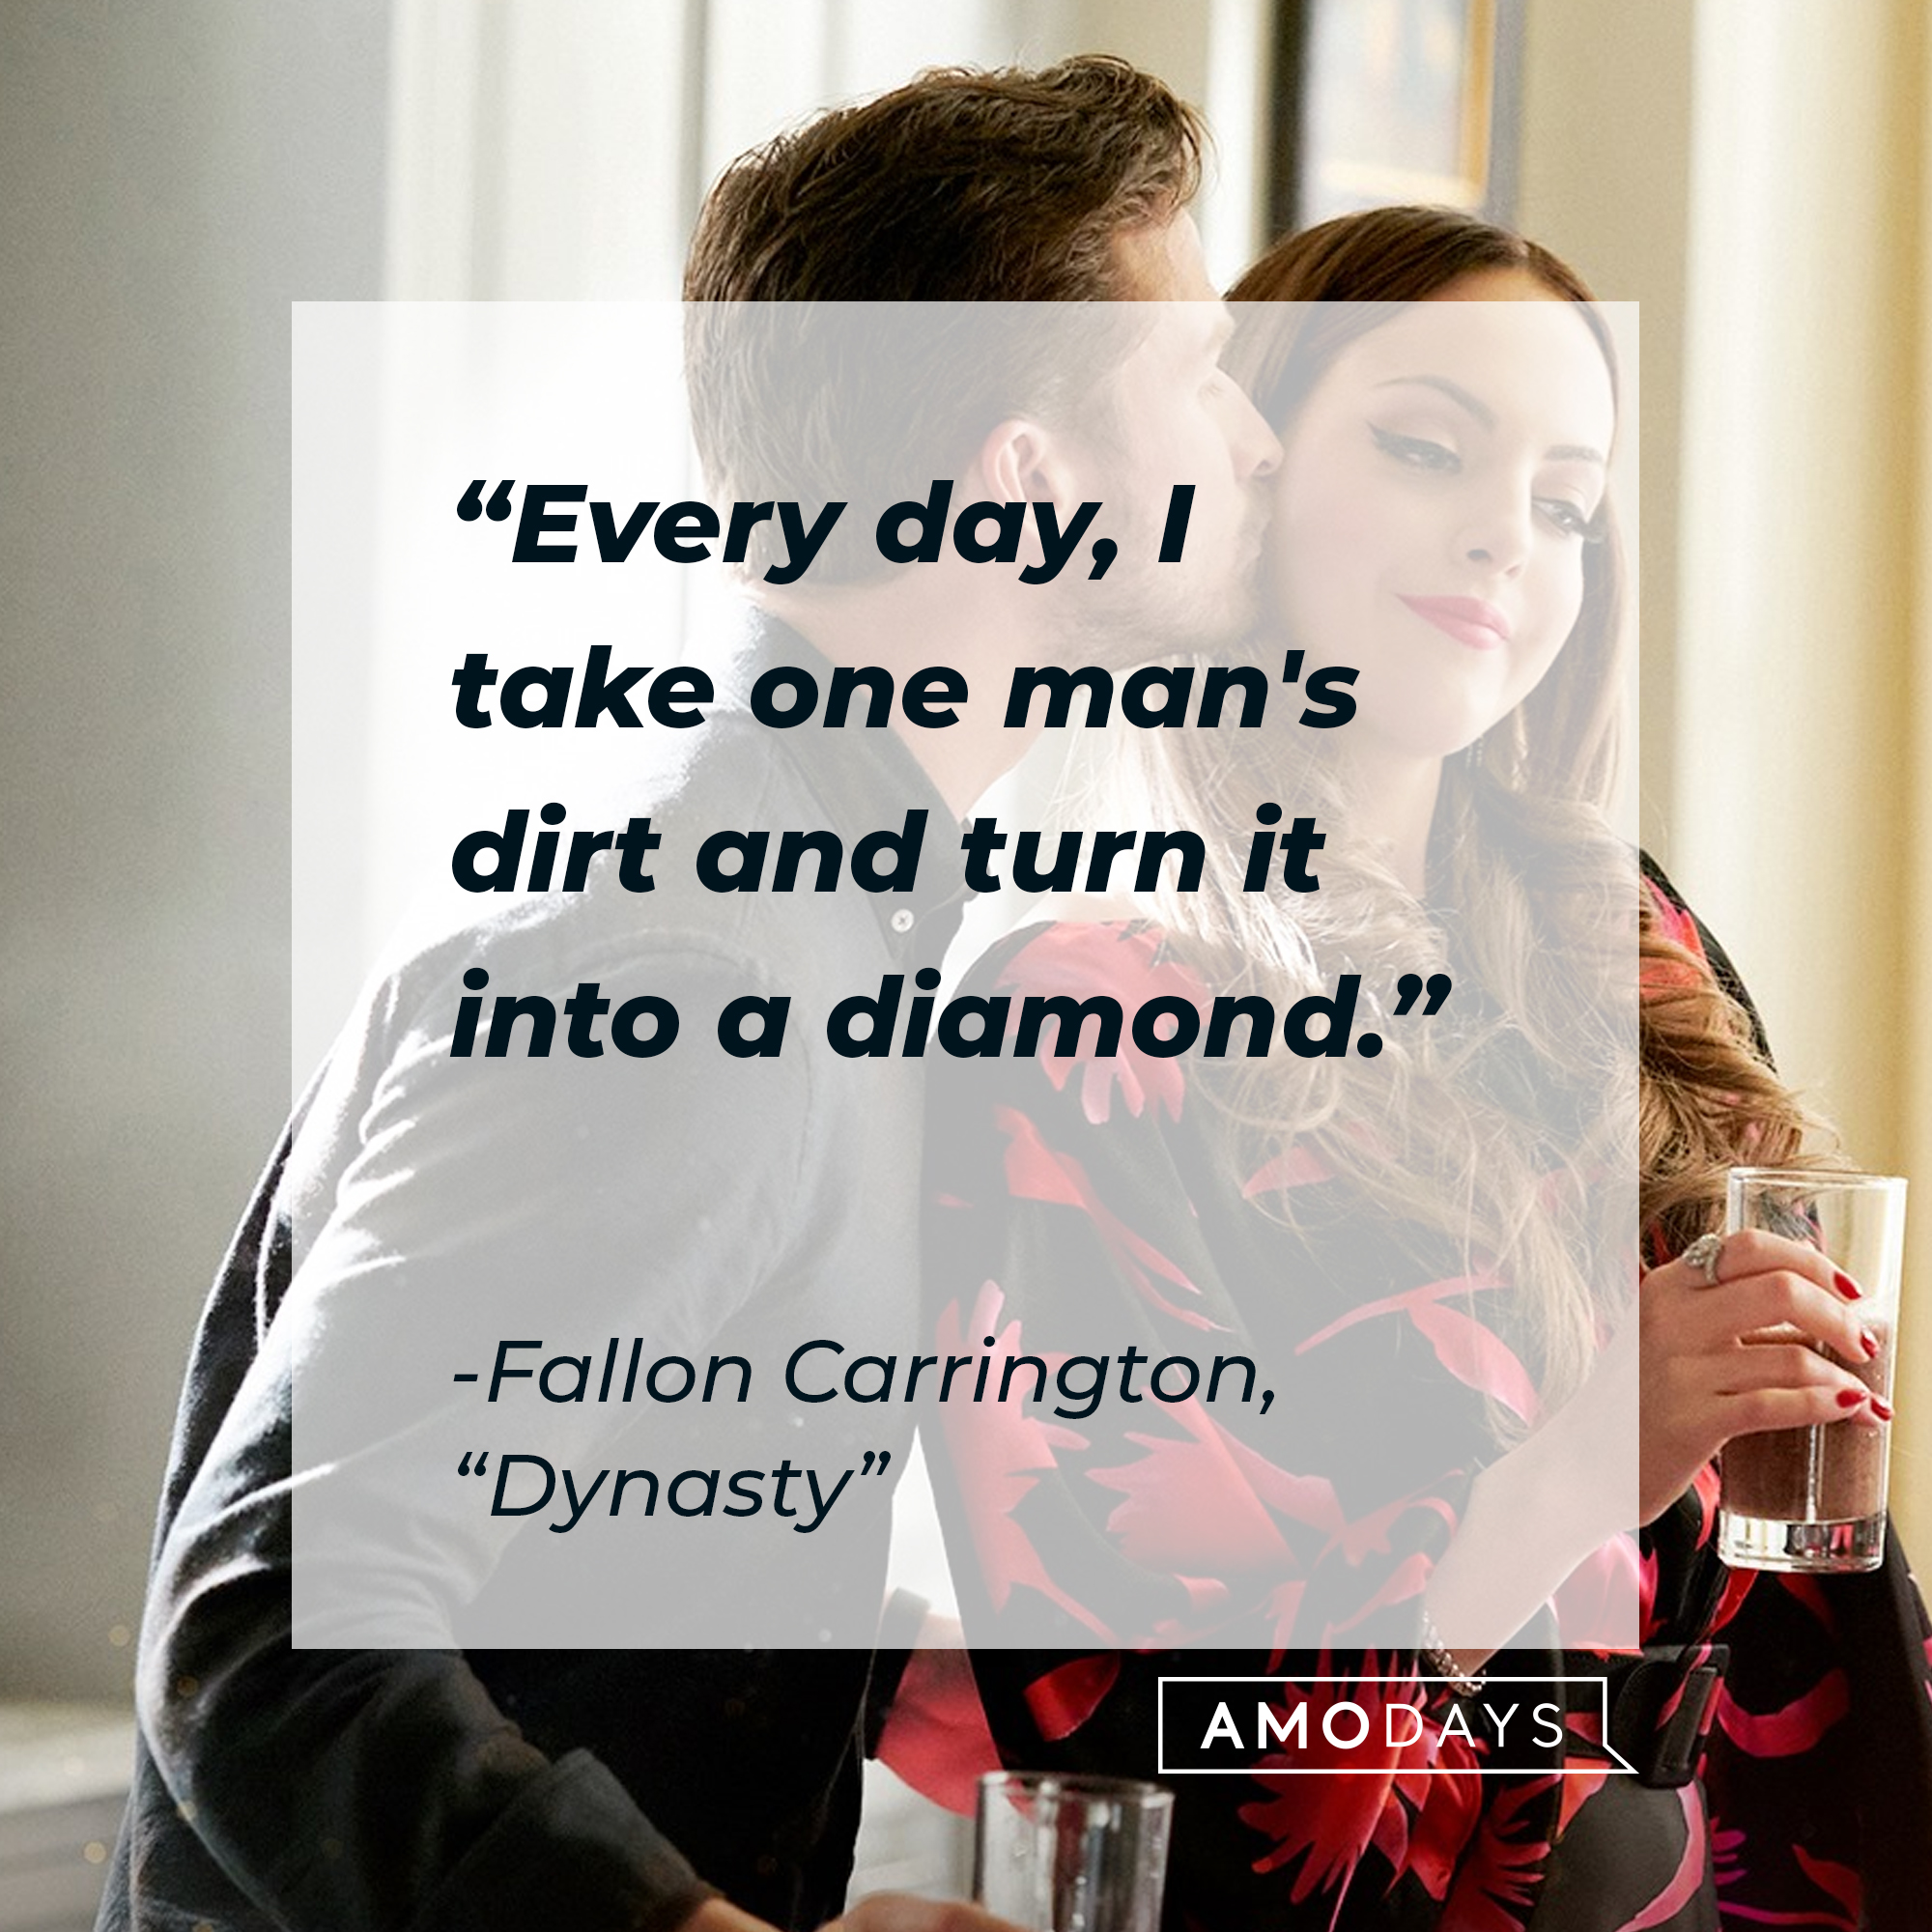 Fallon Carrington’s quote from “Dynasty”: “Every day, I take one man's dirt and turn it into a diamond.” | Source: facebook.com/DynastyOnTheCW